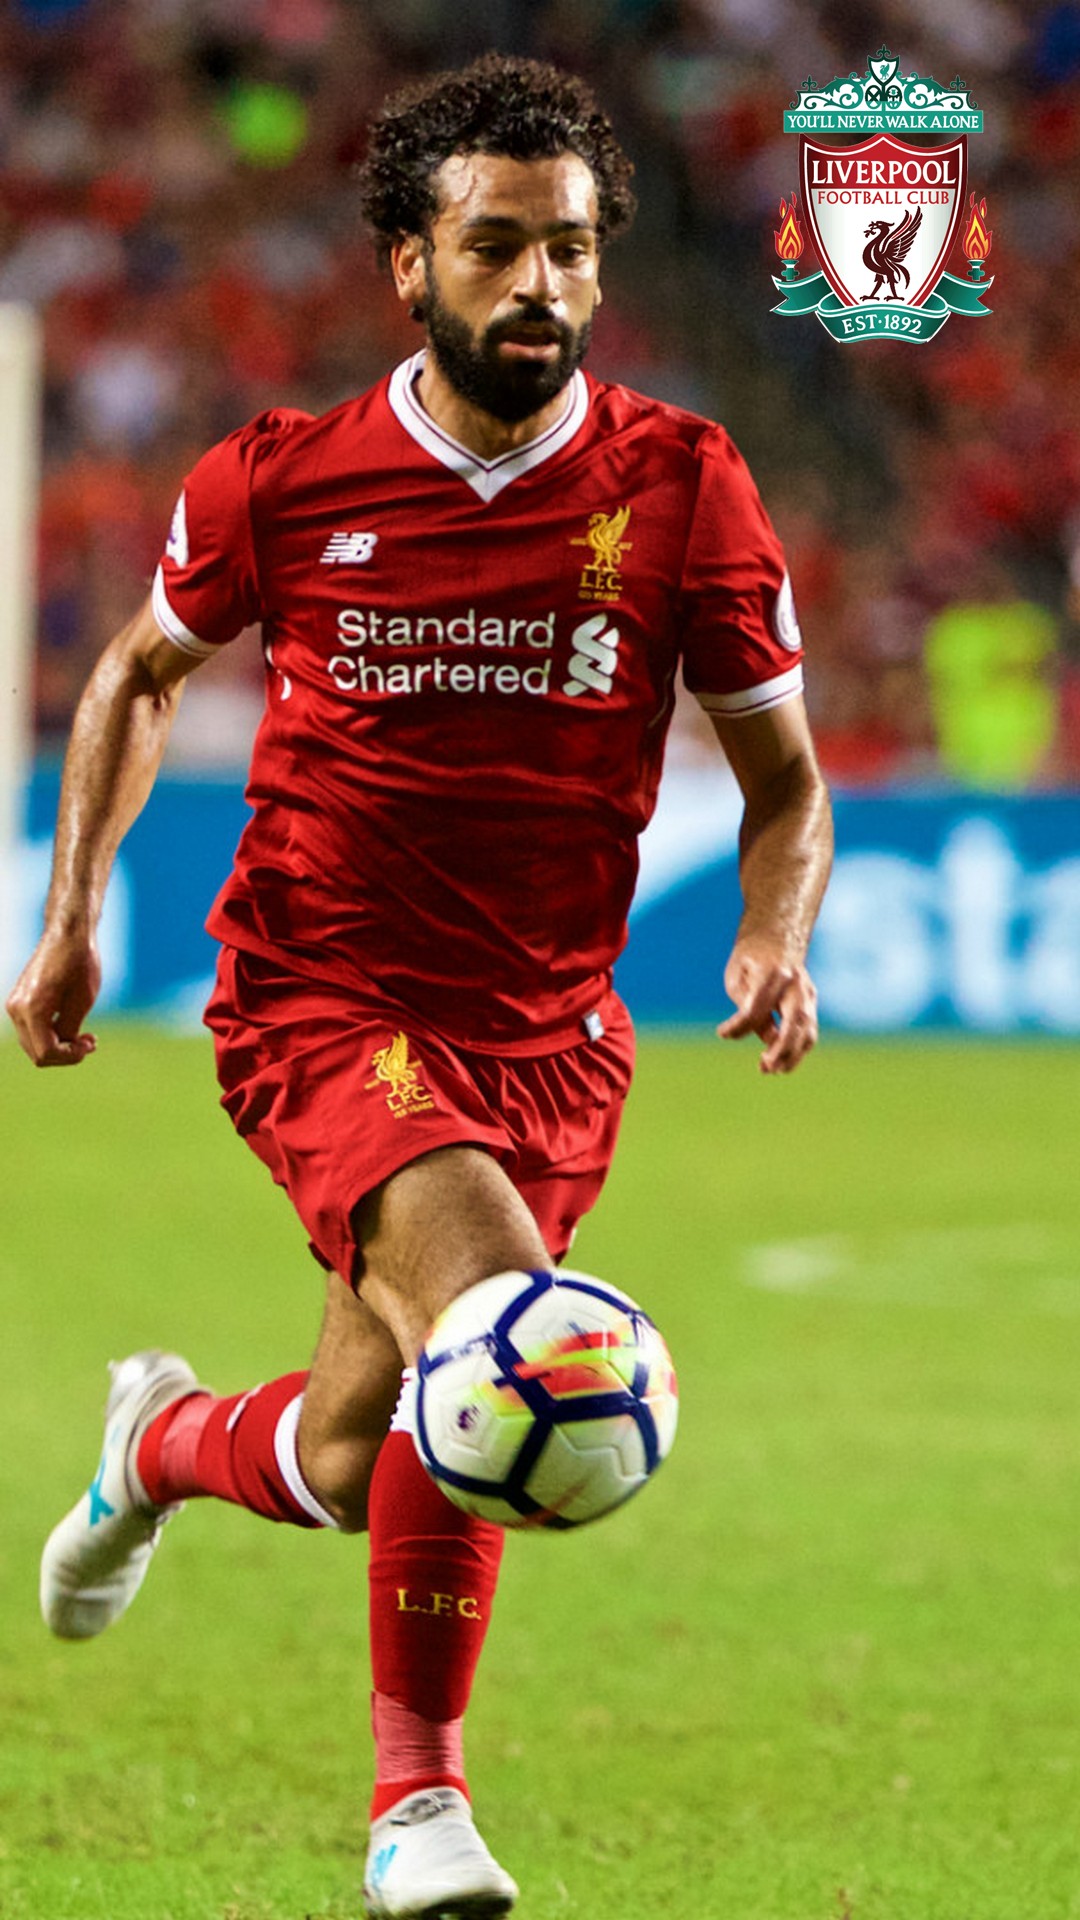 Android Wallpaper HD Mohamed Salah Liverpool with image resolution 1080x1920 pixel. You can make this wallpaper for your Android backgrounds, Tablet, Smartphones Screensavers and Mobile Phone Lock Screen